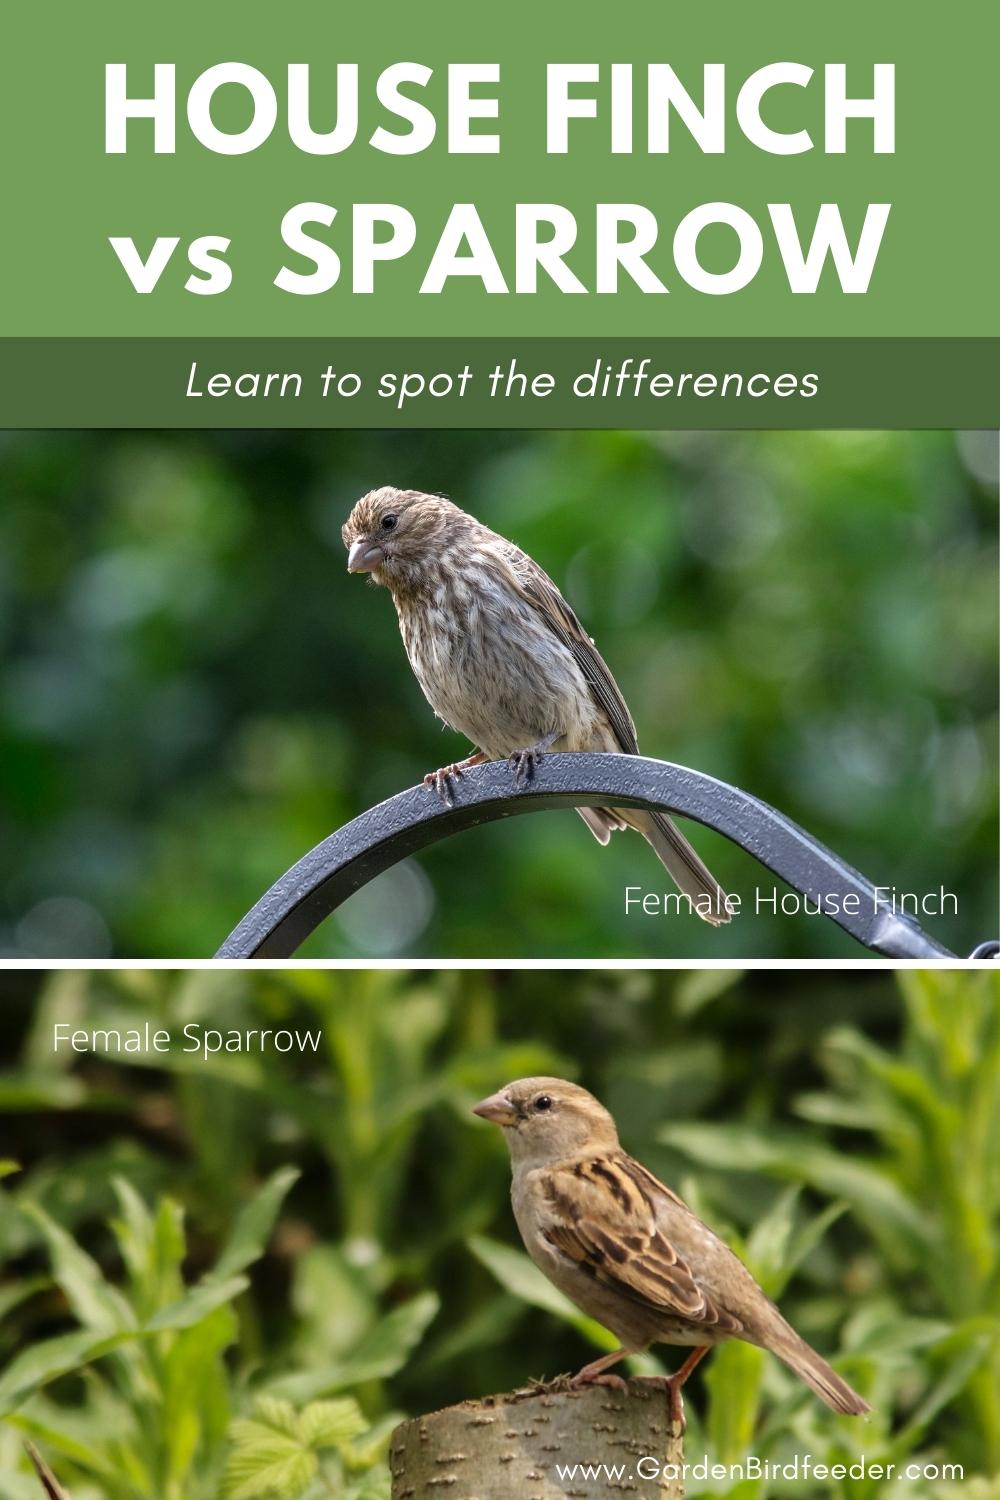 What is the difference between a finch vs sparrow? Learn about the markings, habitats, diet and other information about house finches and sparrows.